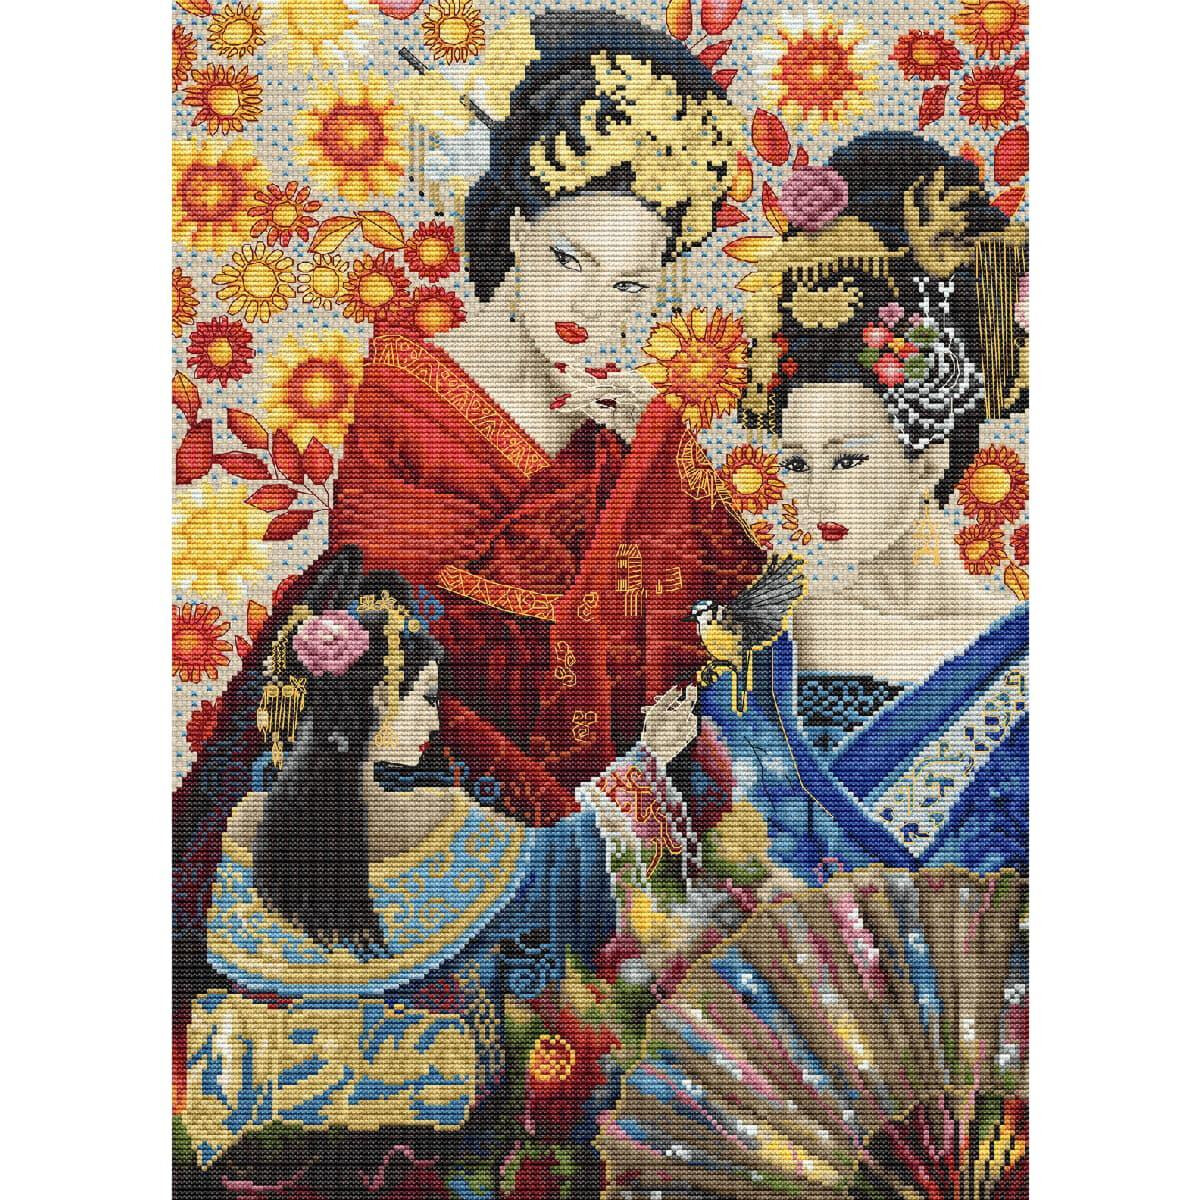 A colorful embroidered picture shows three women in...